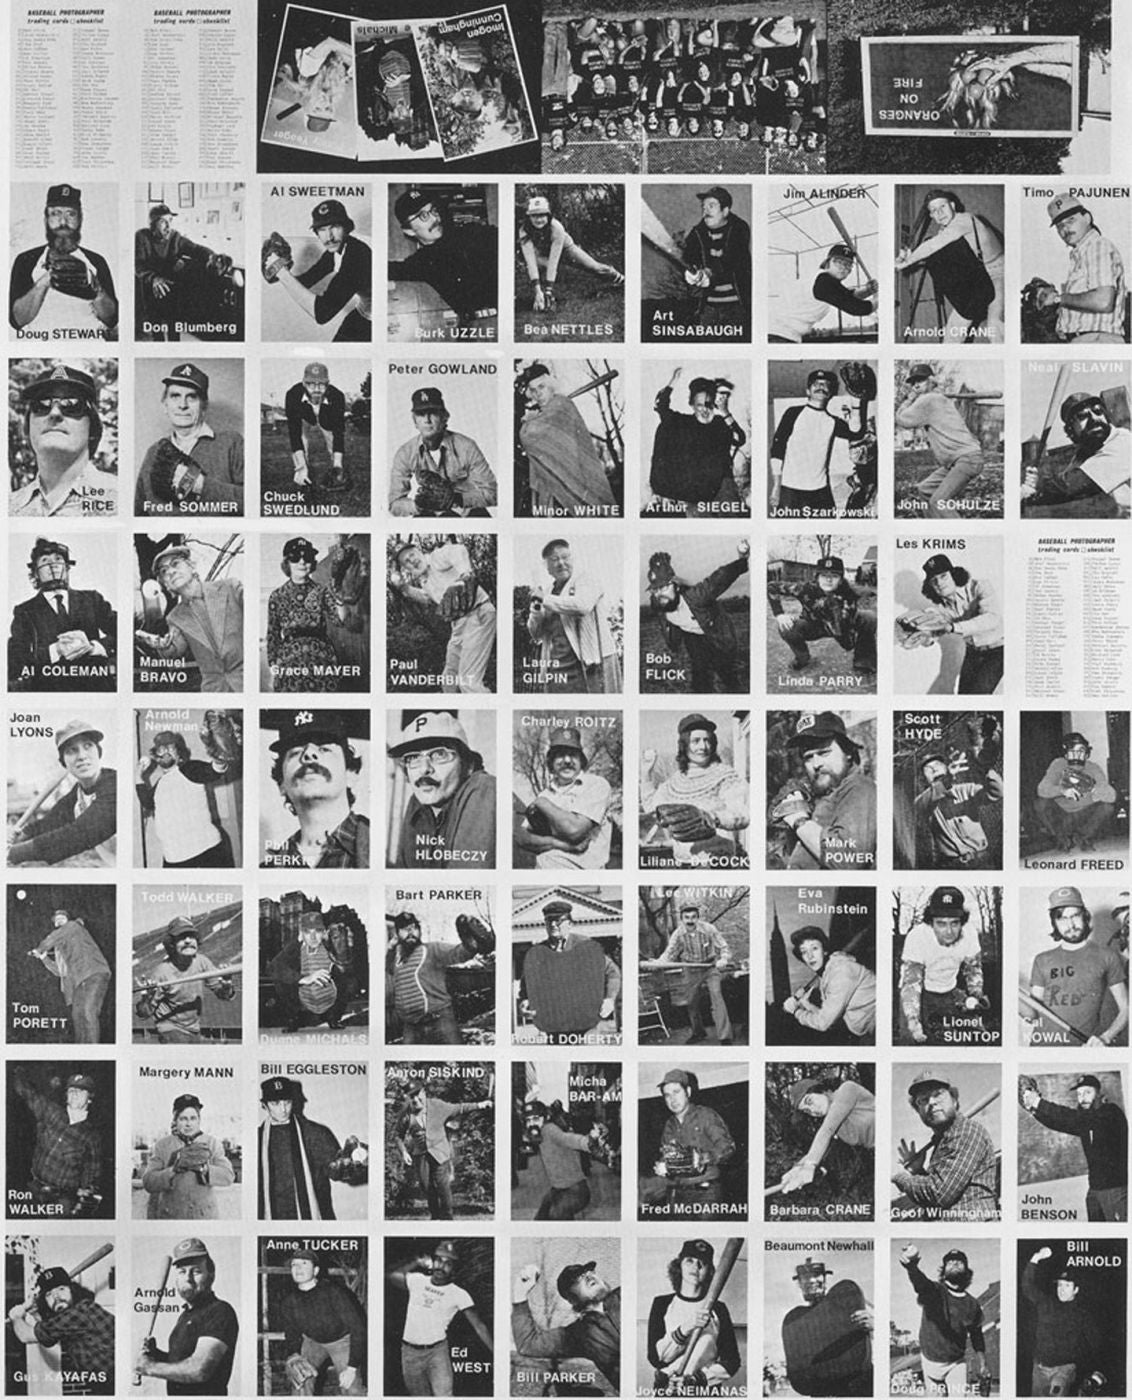 Mike Mandel: Set of 2 Uncut, Original Printed Sheets, Limited Edition of Untitled (Baseball-Photographer Trading Cards with Additional Printed Postcards) [SIGNED]